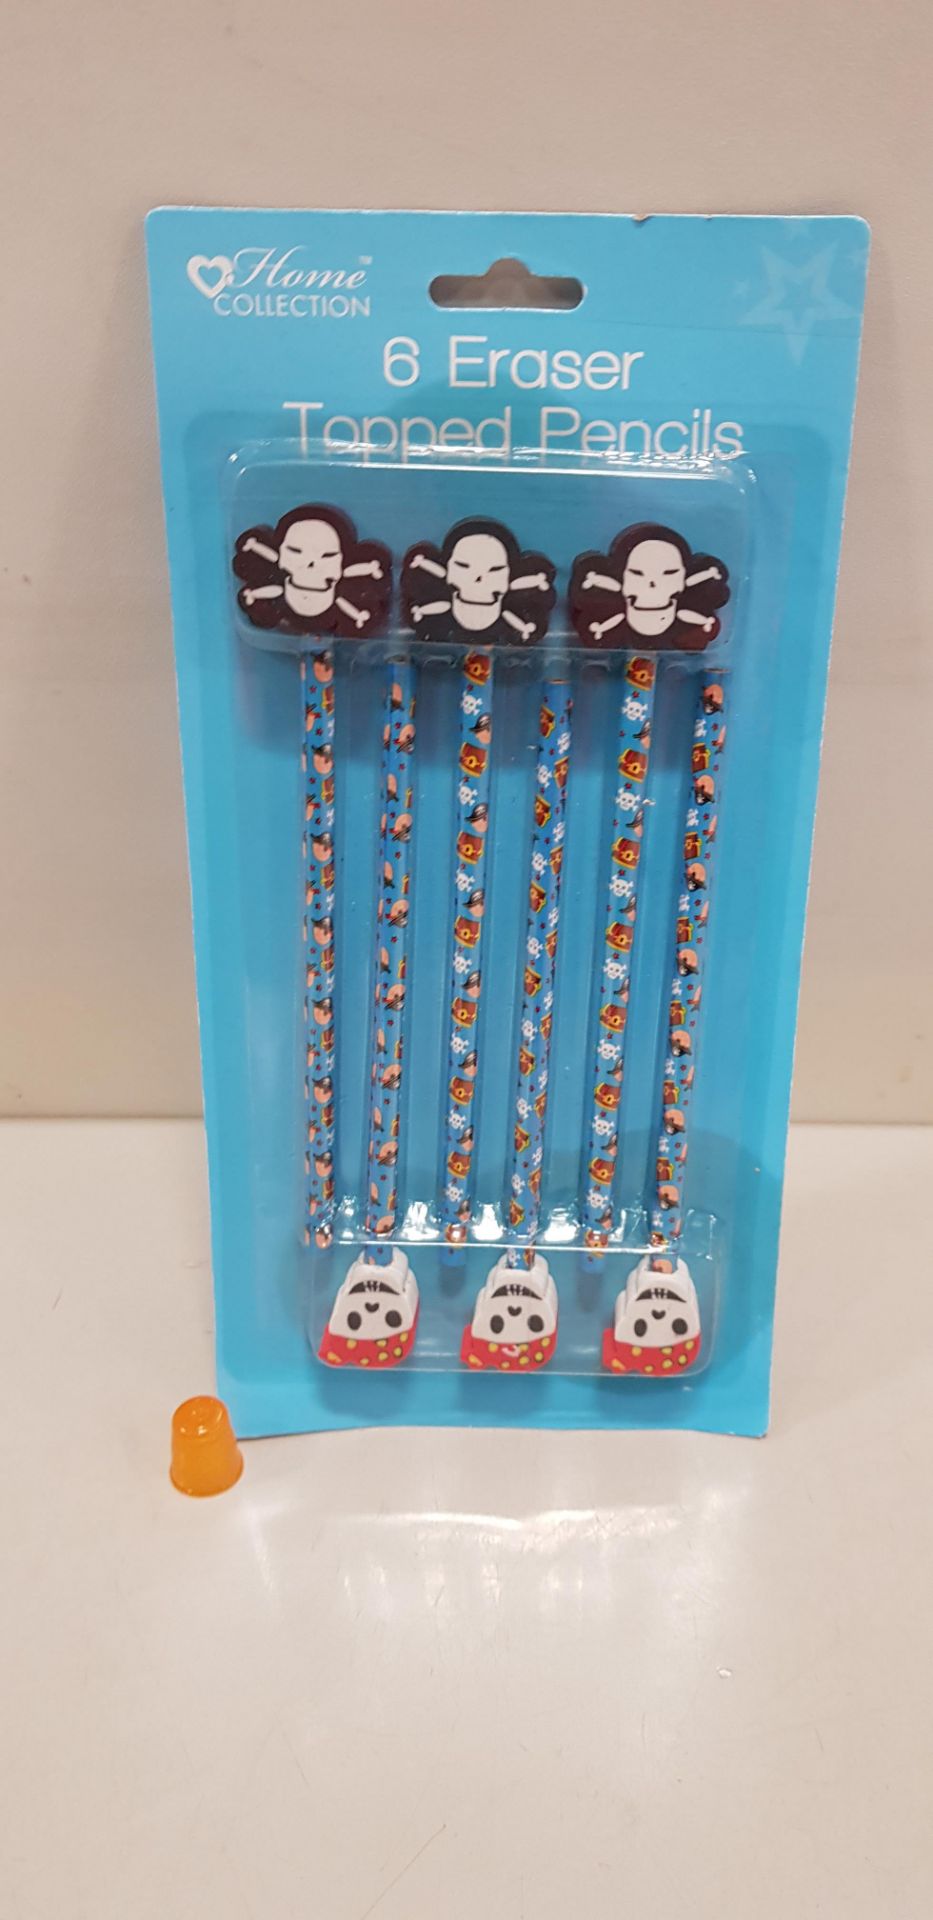 120 X BRAND NEW HOME COLLECTION PACKS OFF 6 ERASER TOPPED PIRATE PENCILS IN TWO STYLES (IN 5 BOXES)